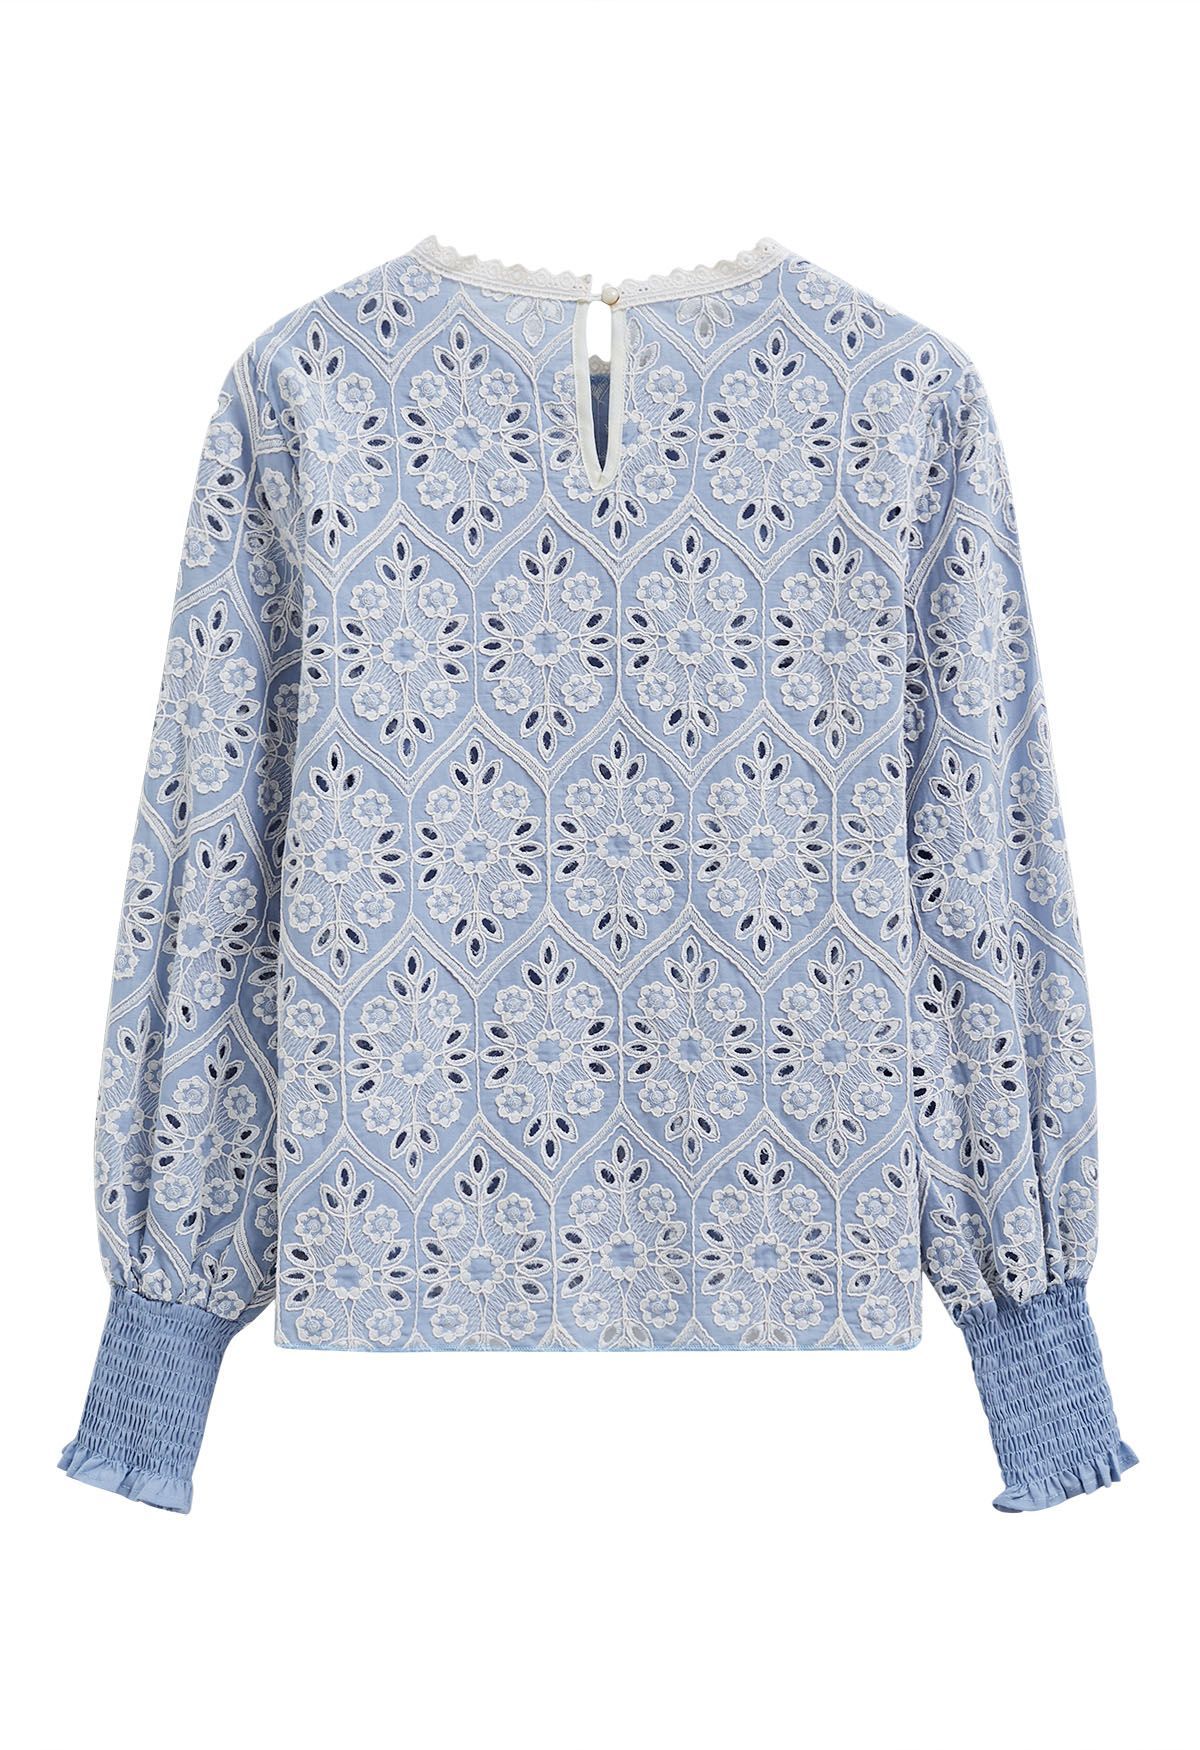 Floral Embroidered Eyelet Dolly Top in Blue | Chicwish